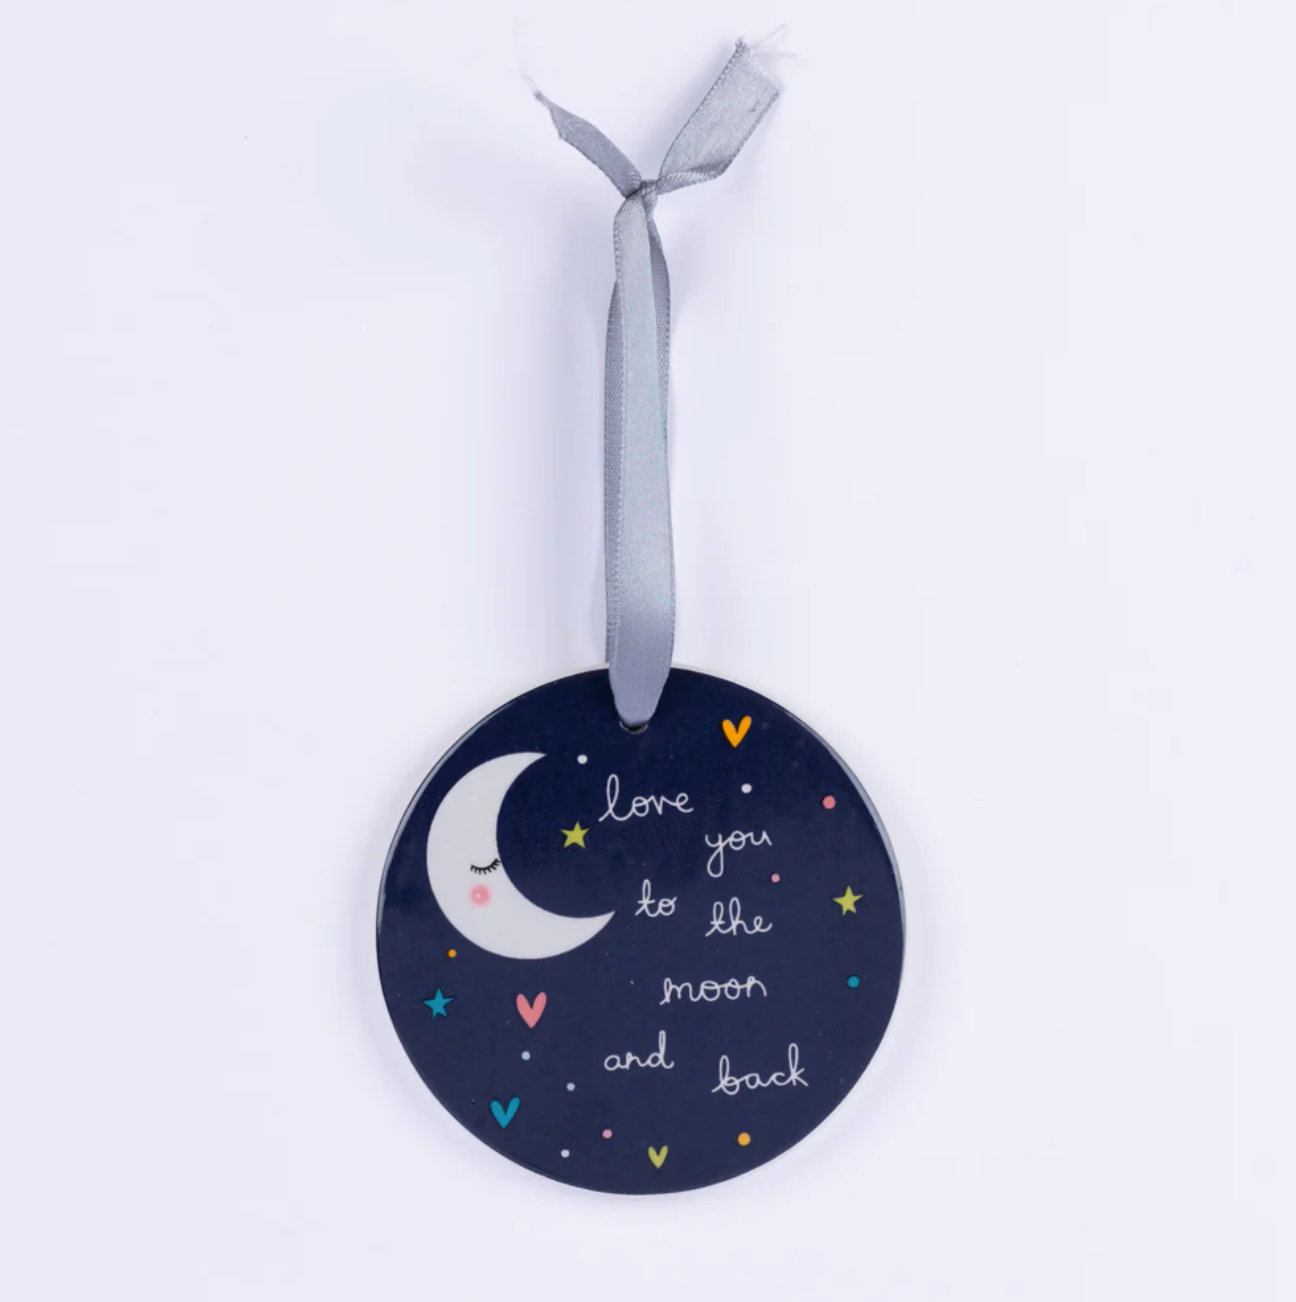 Belly Button Love You to the Moon & Back Ceramic Hanging Circle Decoration